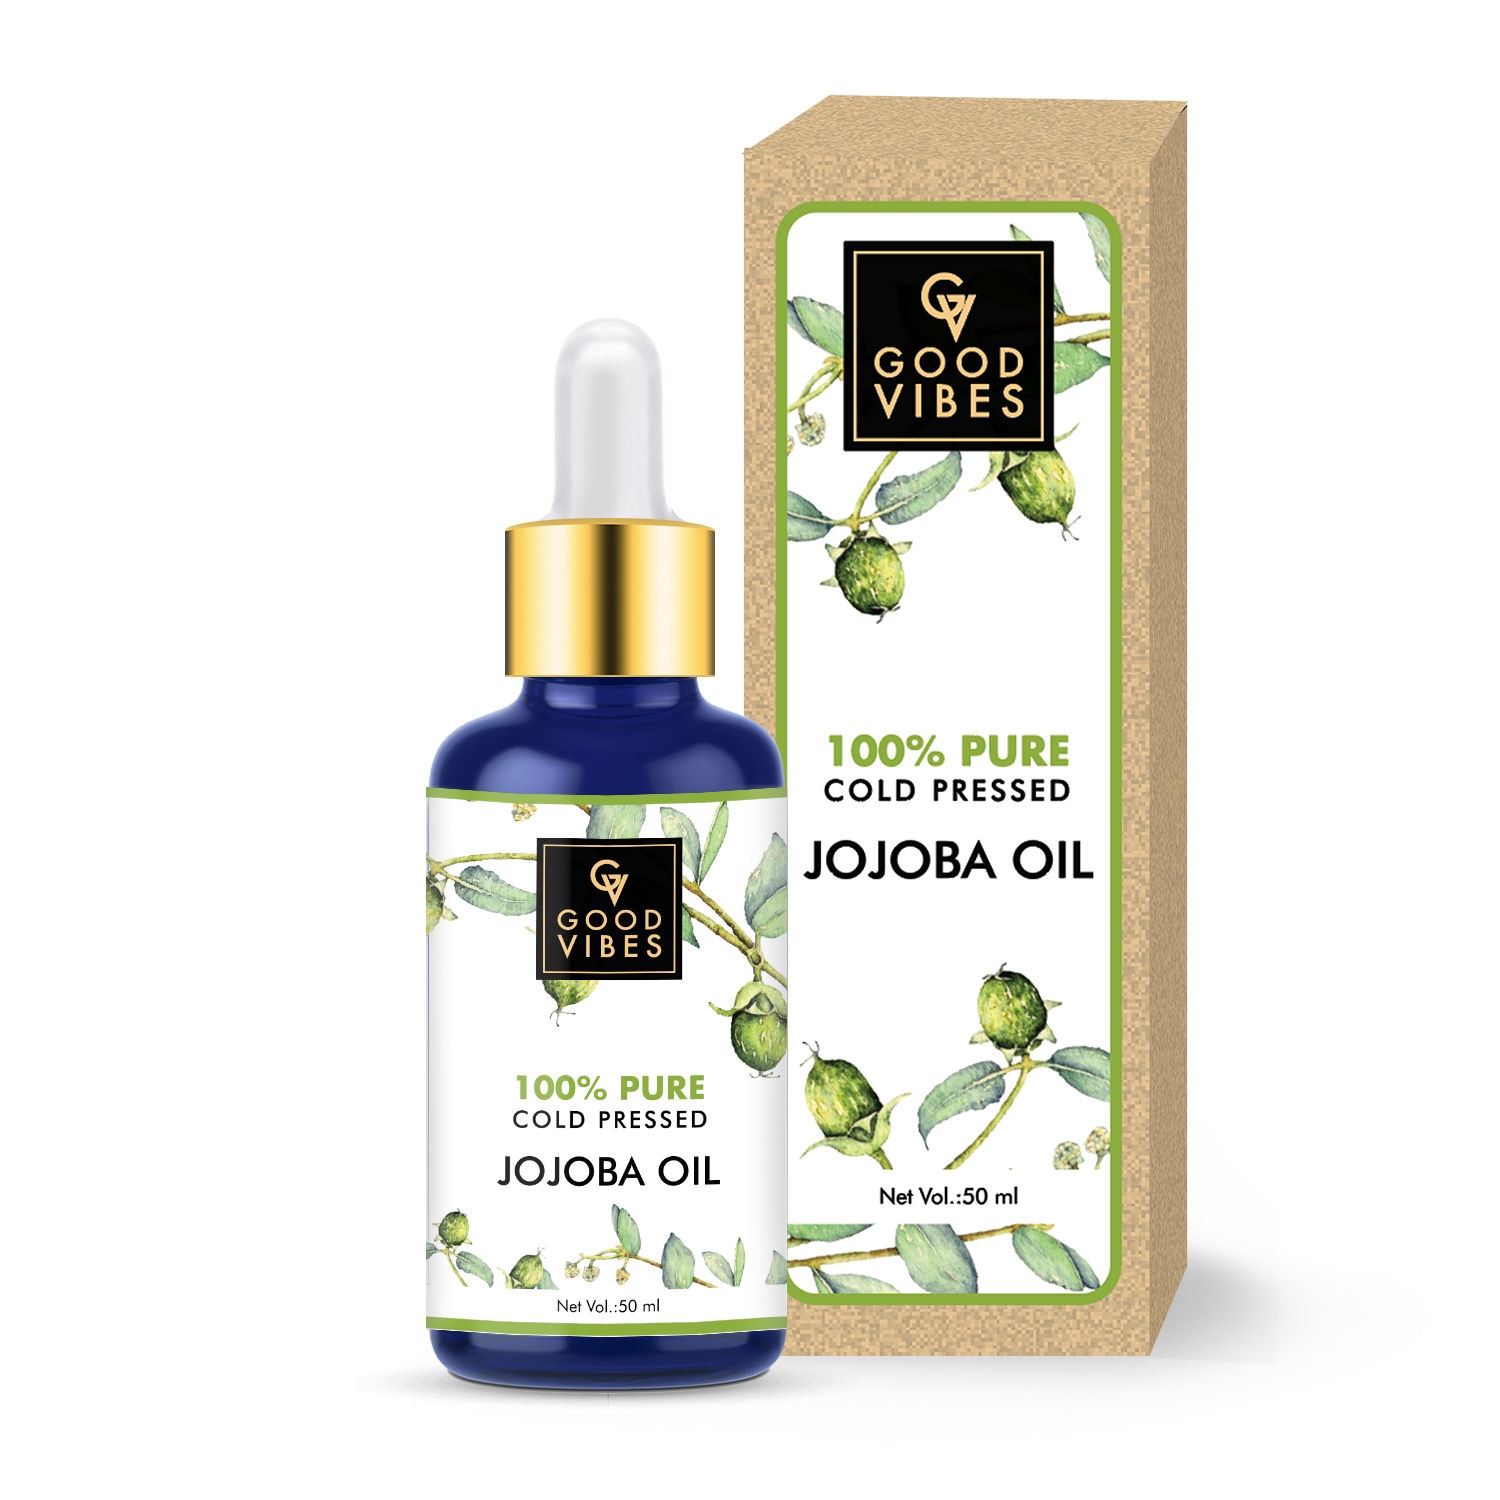 Good Vibes | Good Vibes 100% Pure Cold Pressed Carrier Oil For Hair & Skin - Jojoba (50 ml)